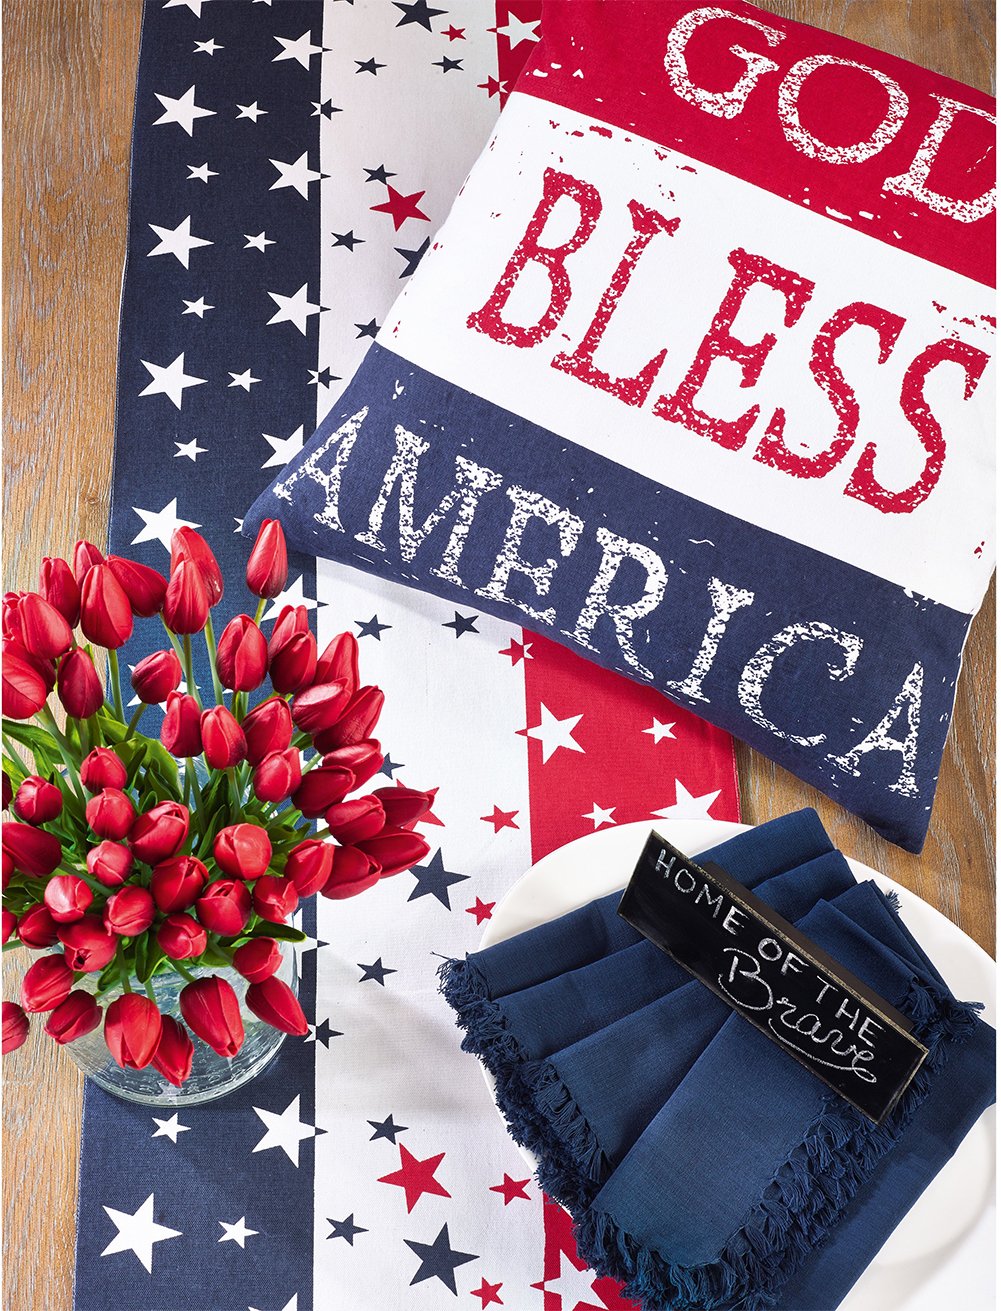 Fennco Styles 4th of July Star Spangled American Flag 100% Cotton Table Runner 16" W x 72" L - Multicolored American Flag Inspired Table Cover for Home Décor, Dinner Parties, National Holidays